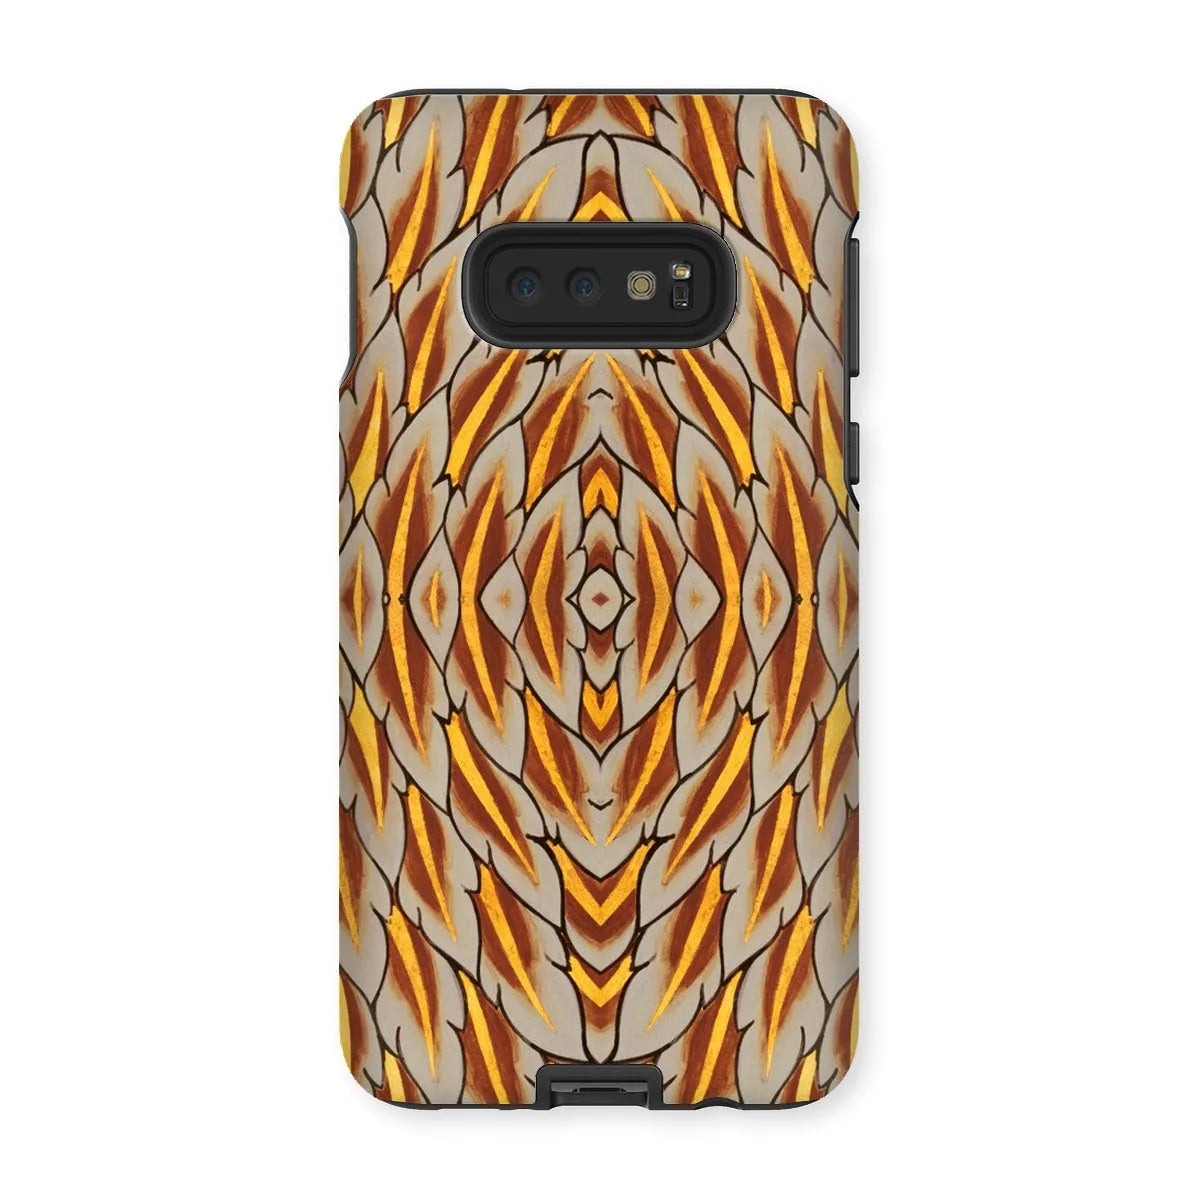 Featherweight Champion Thai Aesthetic Art Phone Case - Samsung Galaxy S10e / Matte - Mobile Phone Cases - Aesthetic Art